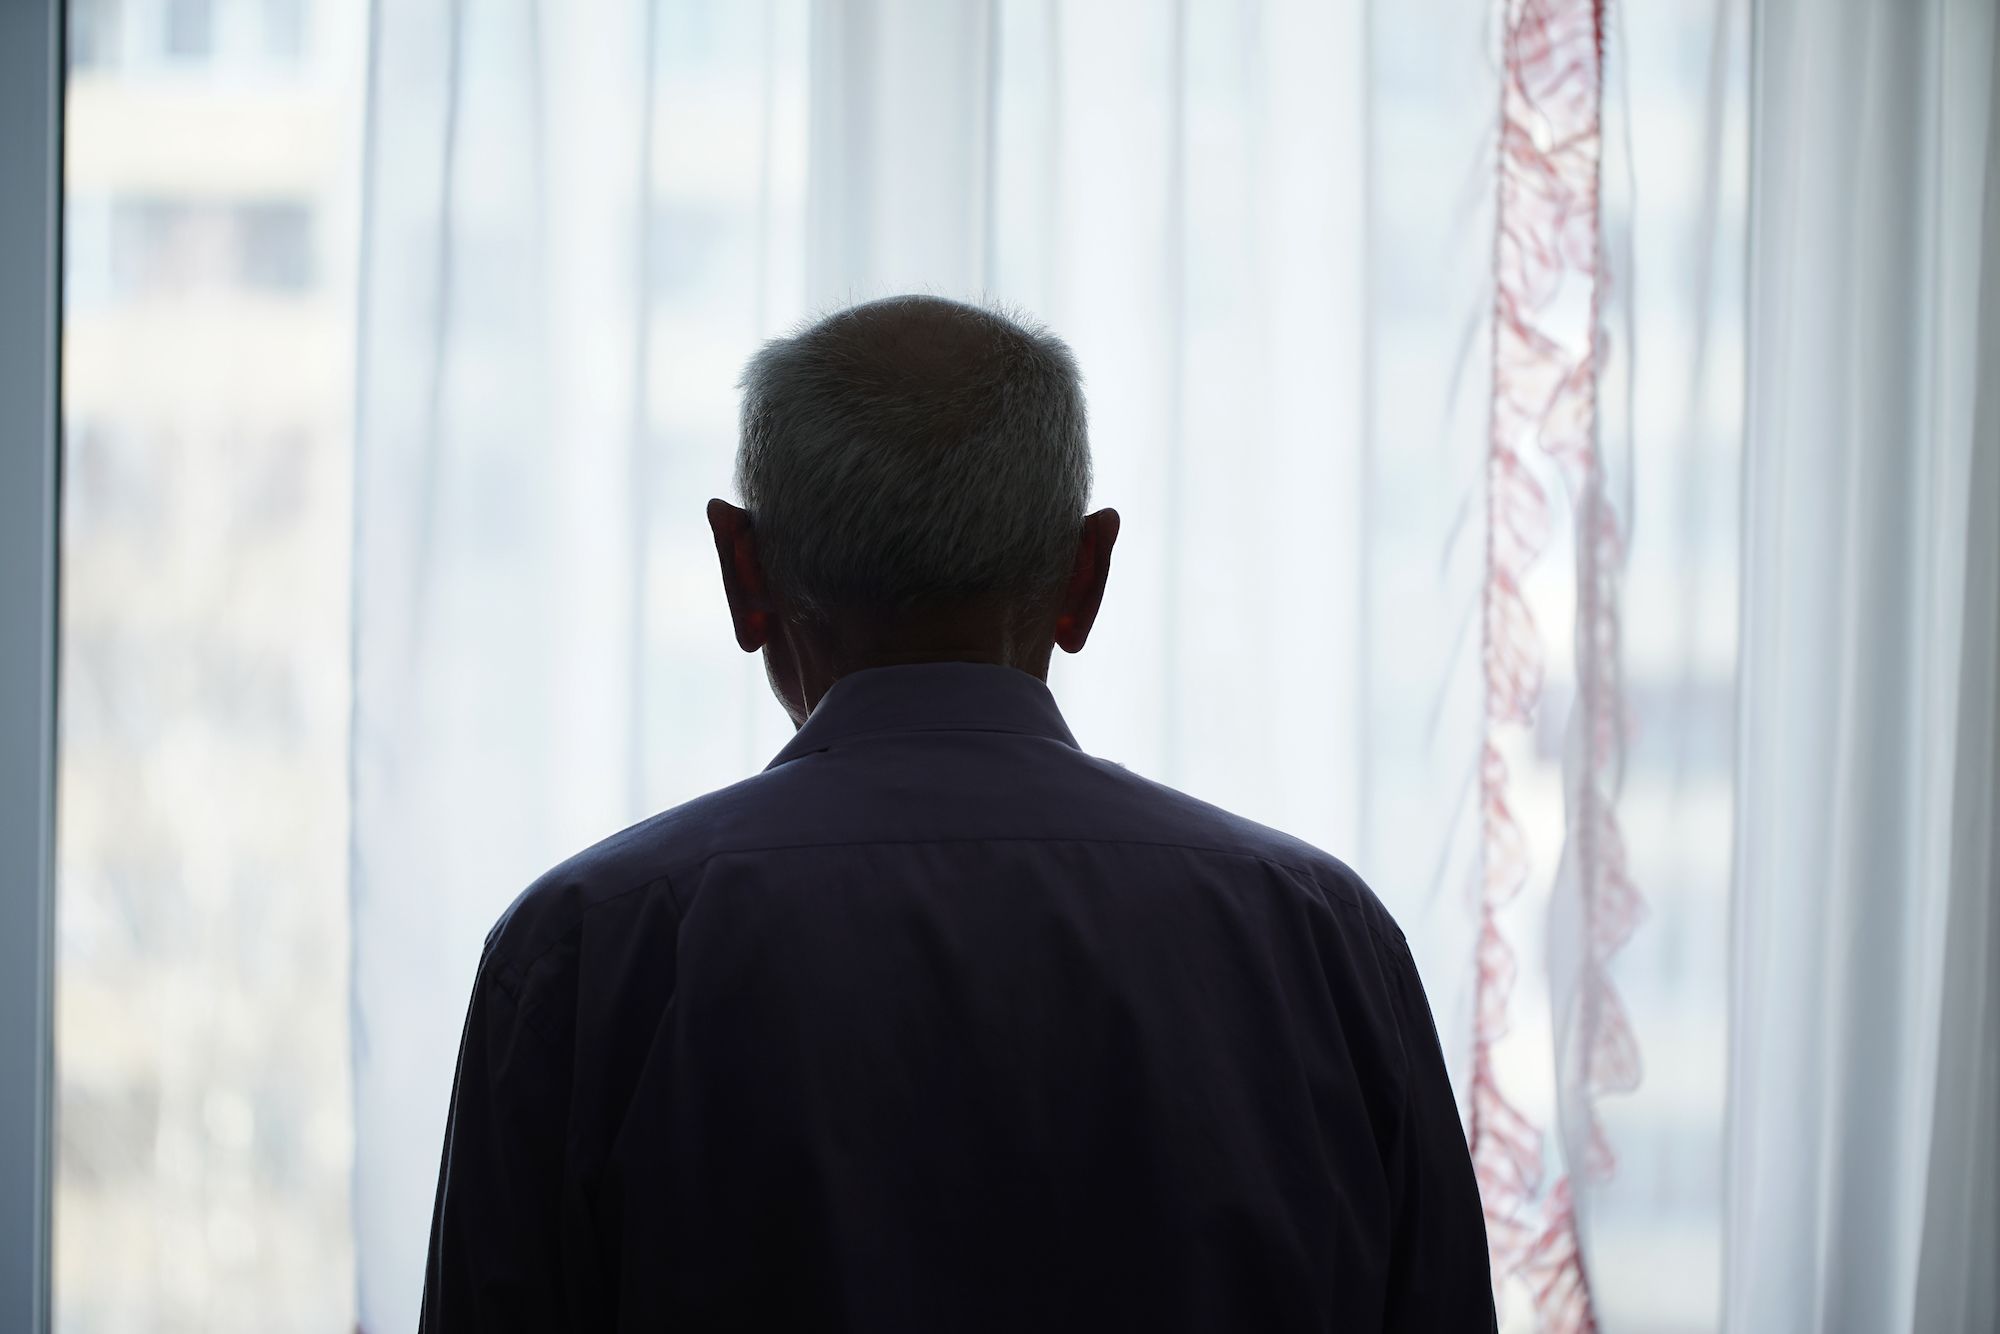 The loneliness epidemic: Nearly 1 in 4 adults feel lonely, new